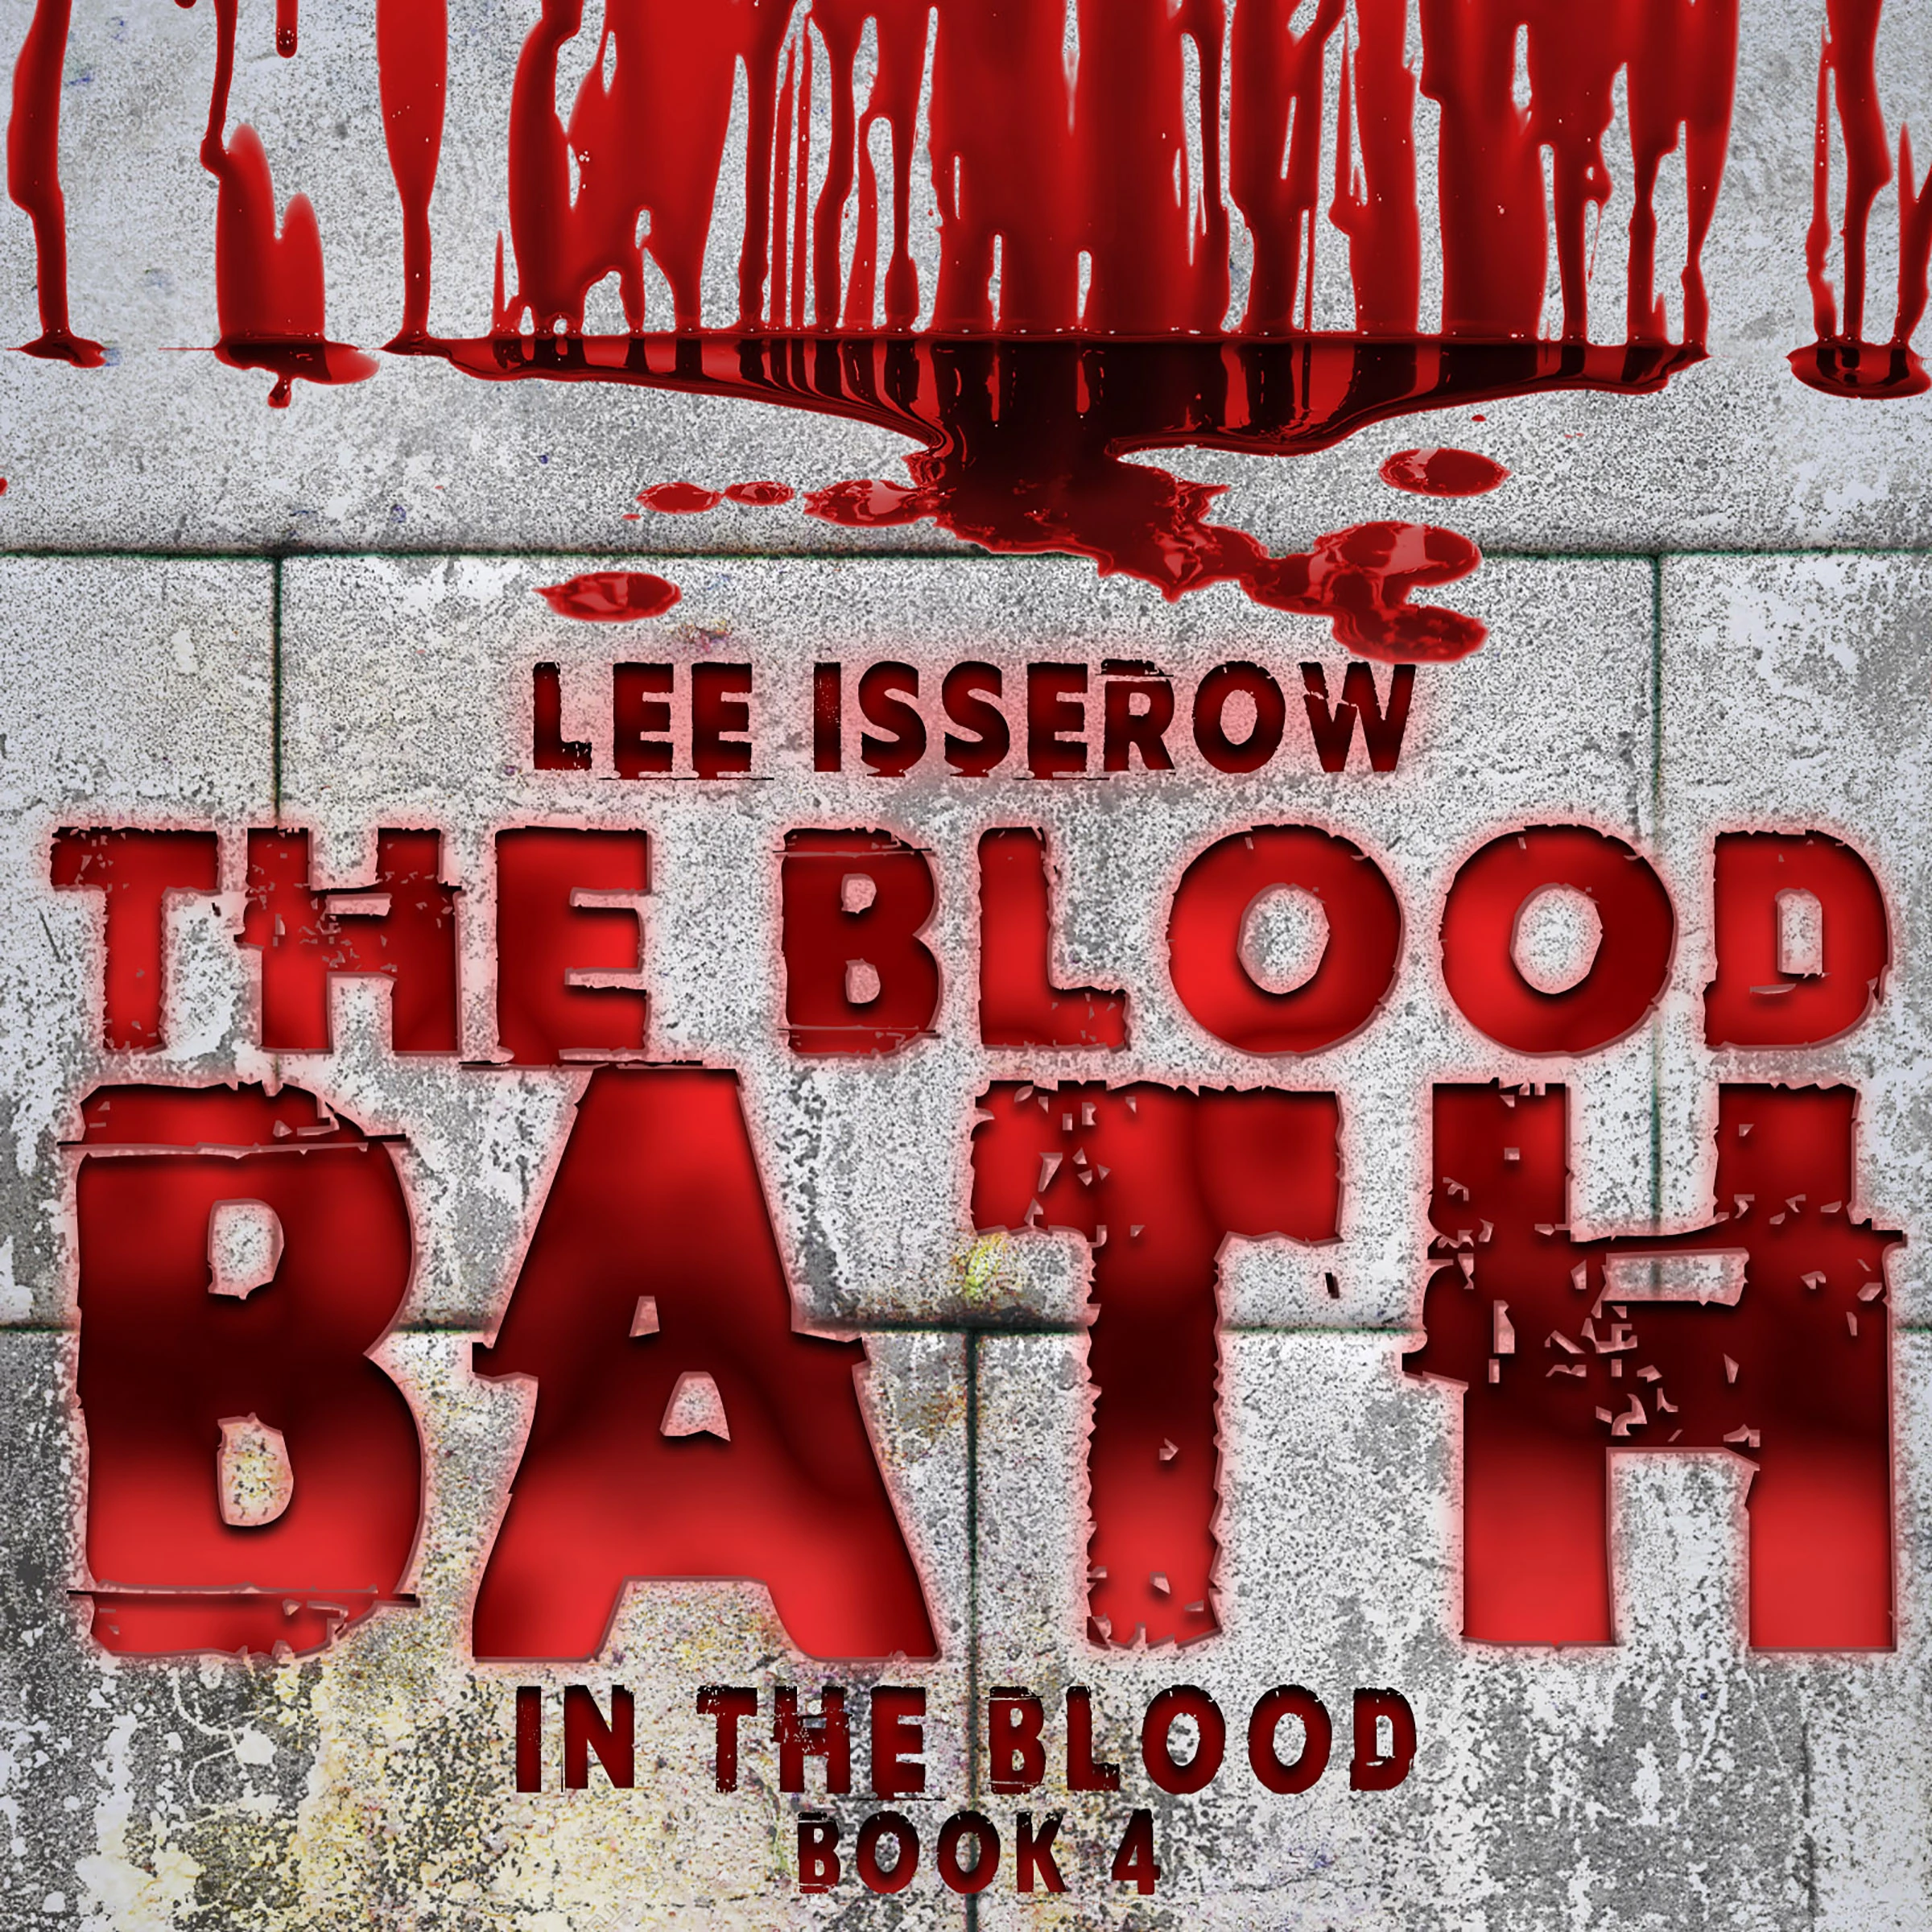 The Blood Bath by Lee Isserow Audiobook